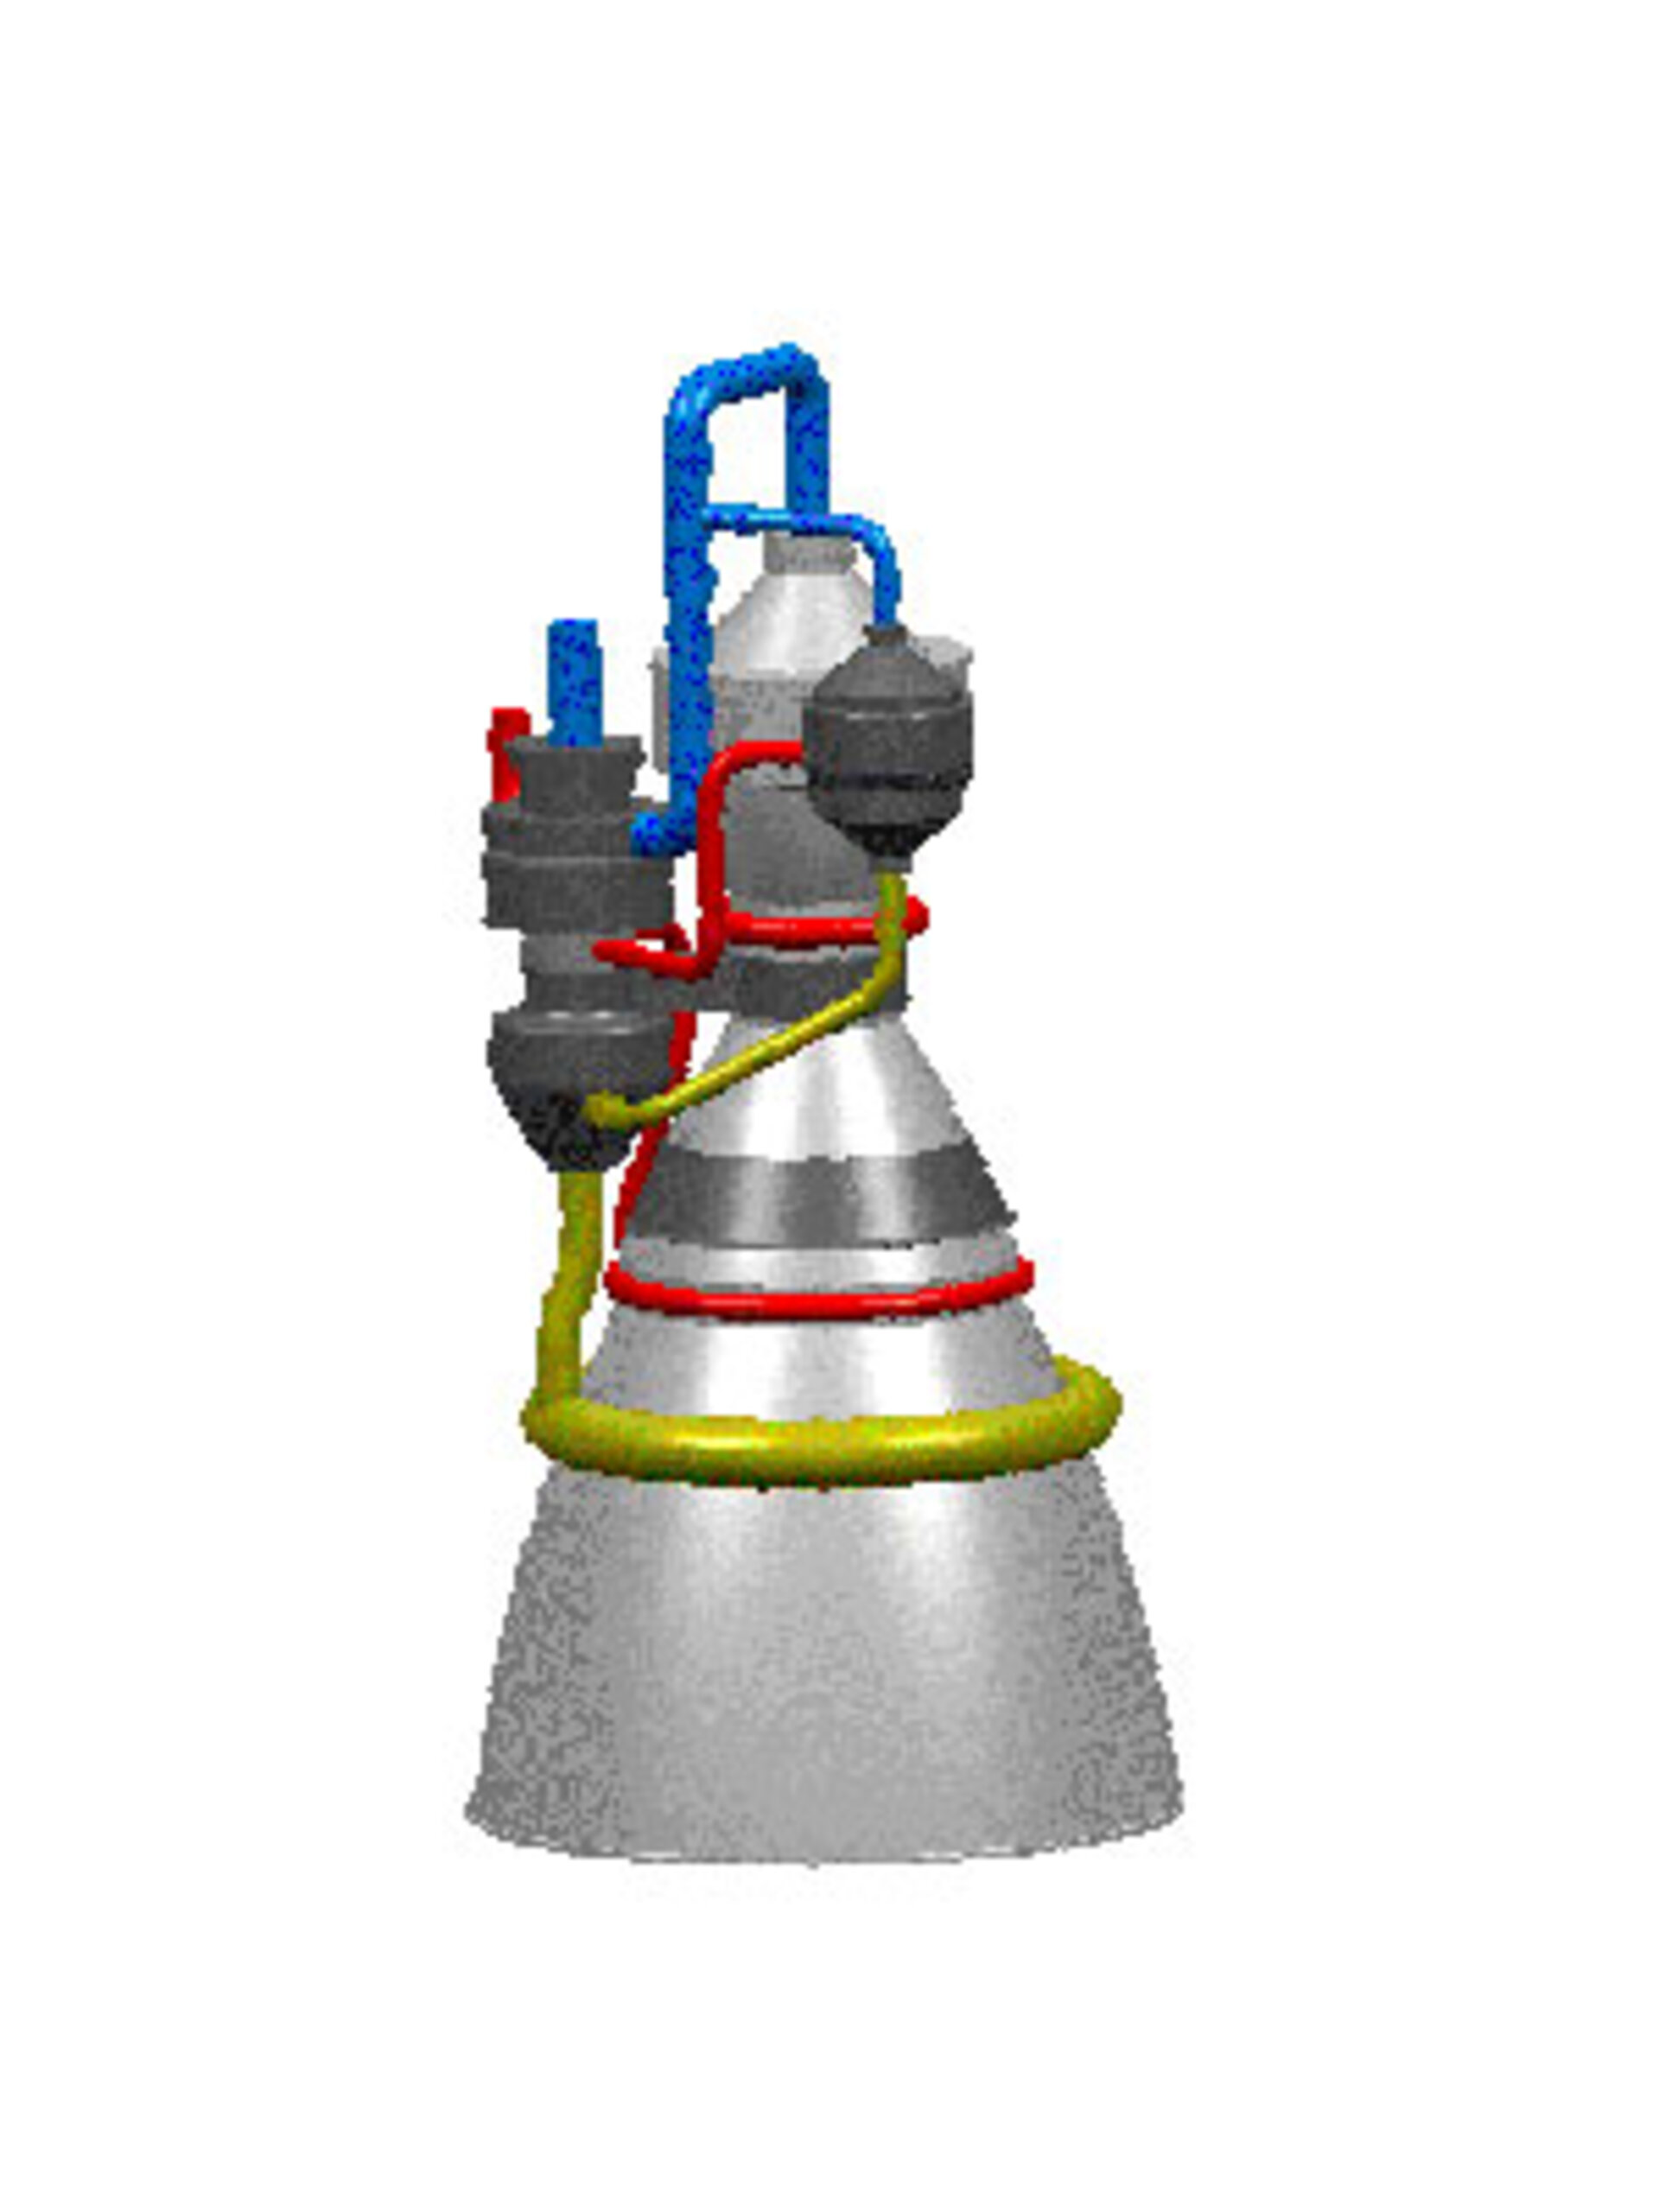 Concept of an upper stage engine for a future launcher